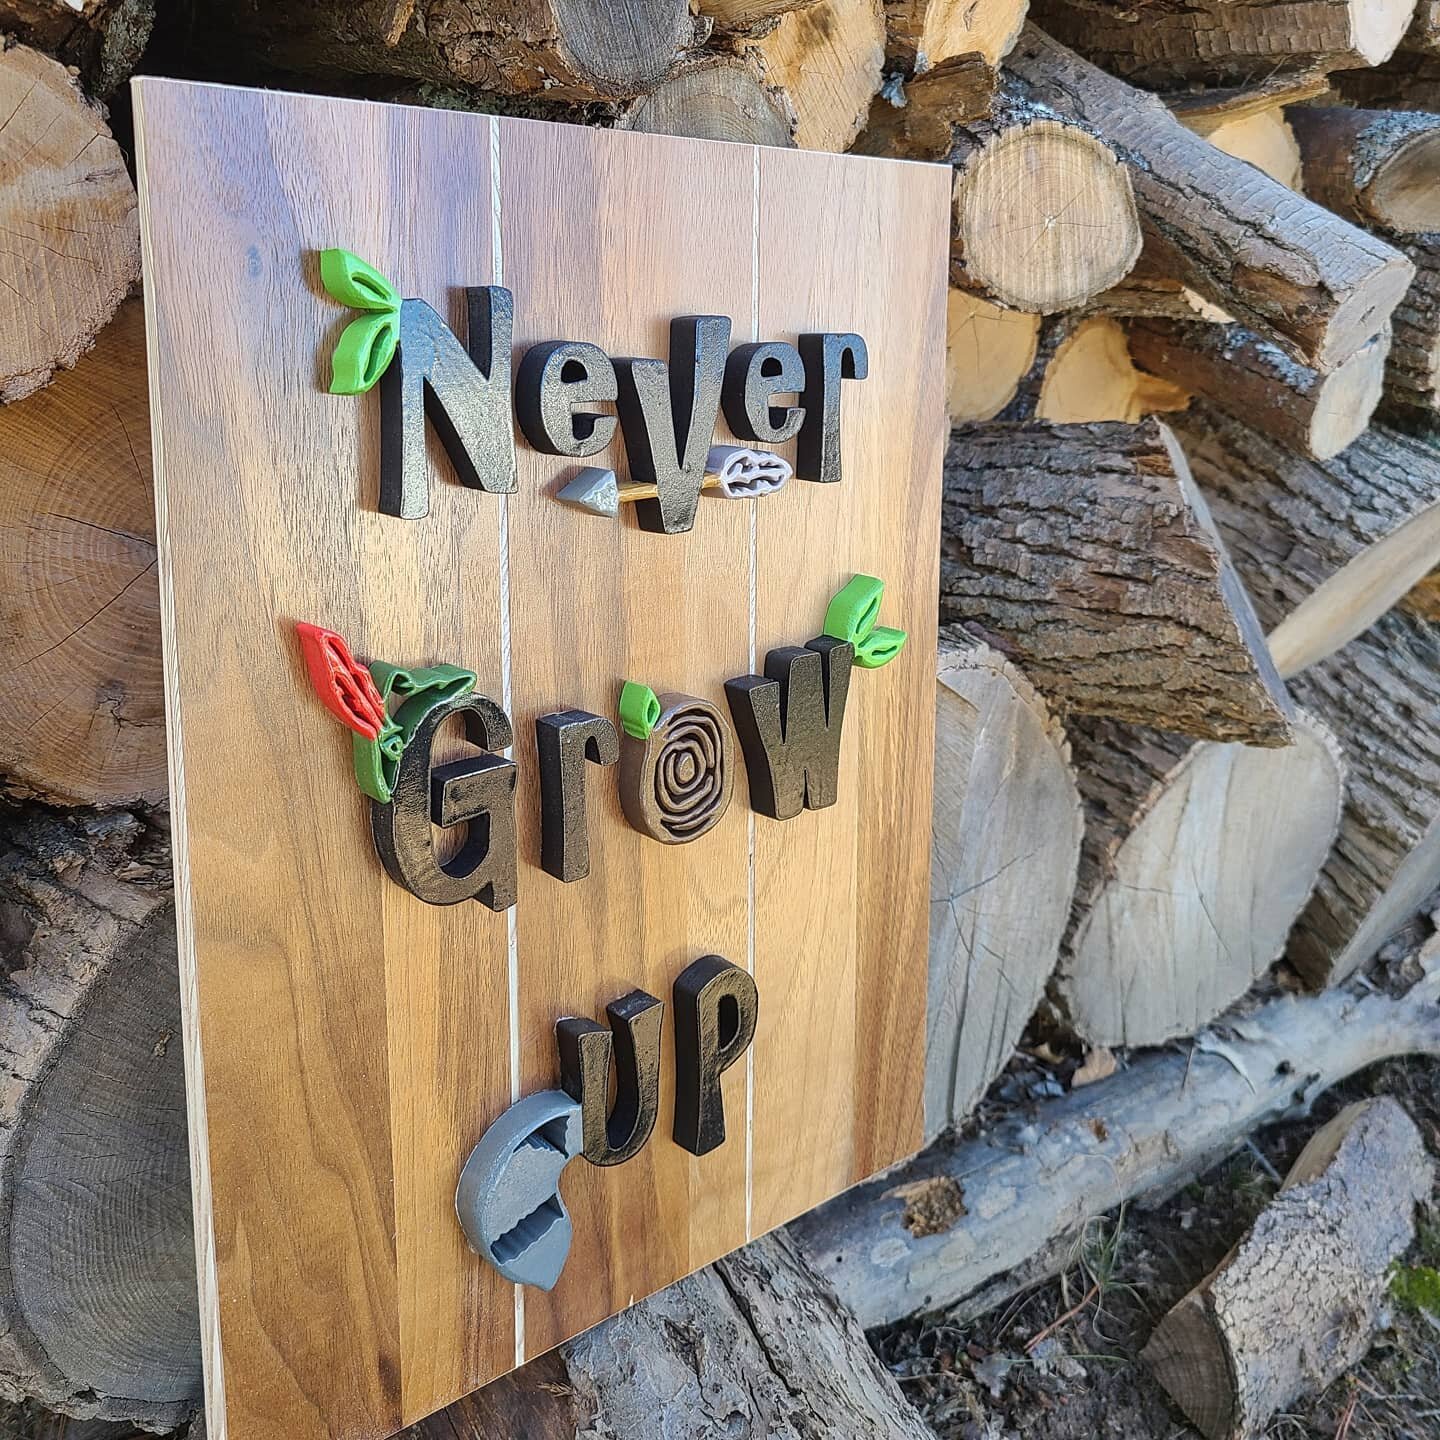 I have 2 of these adorable Peter Pan signs available on my website jparisdesigns.com!
.
.
Design by @jennylynnwestdesign  on Etsy.
.
.
.
.
#peterpan #nevergrowup #disney #disneysign #disneydesign #lostboys #neverland #neverneverland #peterandwendy #n